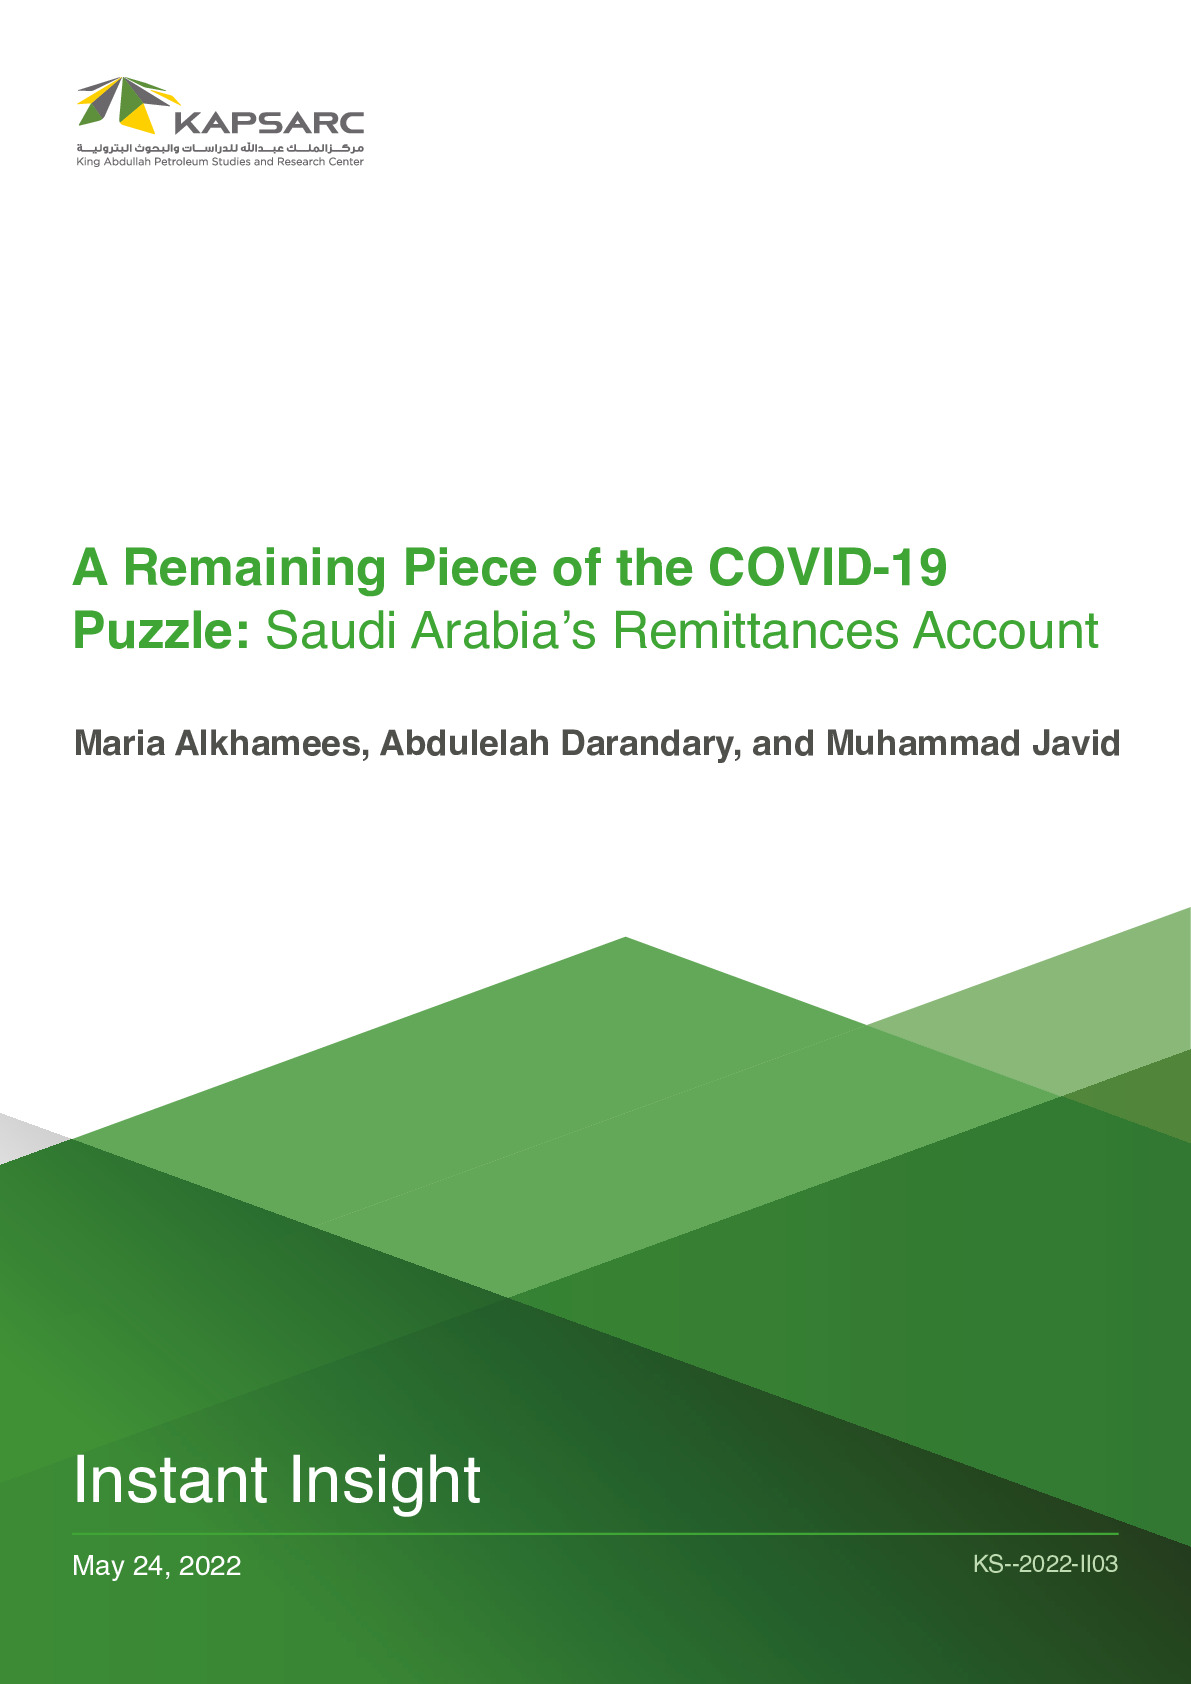 A Remaining Piece of the COVID-19 Puzzle: Saudi Arabia’s Remittances Account